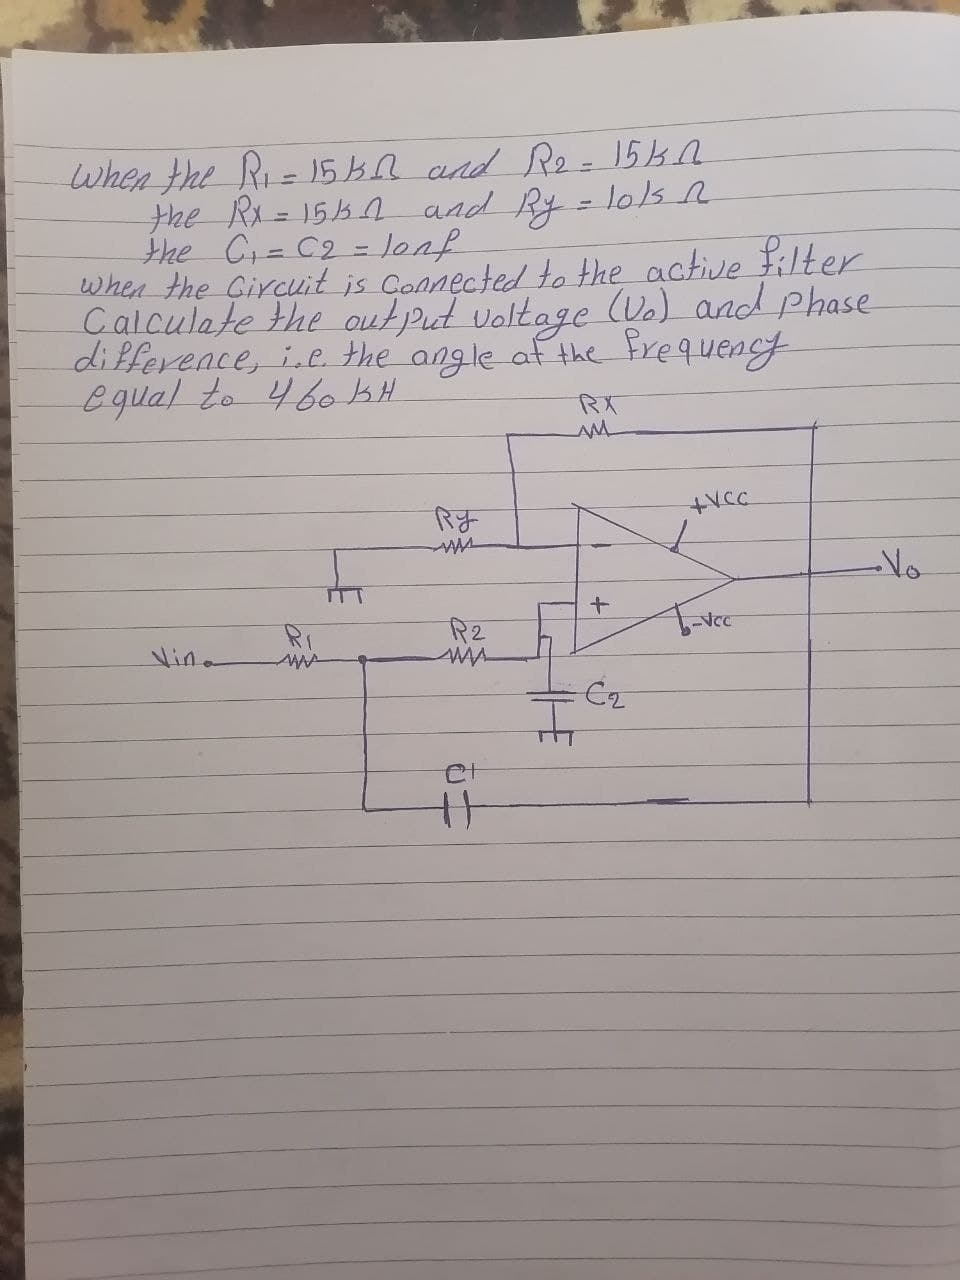 When the Ri= 15KR and Re - 15bA
the Rx= 155n and By = los n
the Ci=C2 = lonf
when the Circuit is Connected to the active Filter
Calculate the out Put voltage (Ve) and Phase
di fference, ie the angle af the Frequency
egual to 46o bH
RX
Rす
-Vo
RI
रि2
Vina
C2
二
